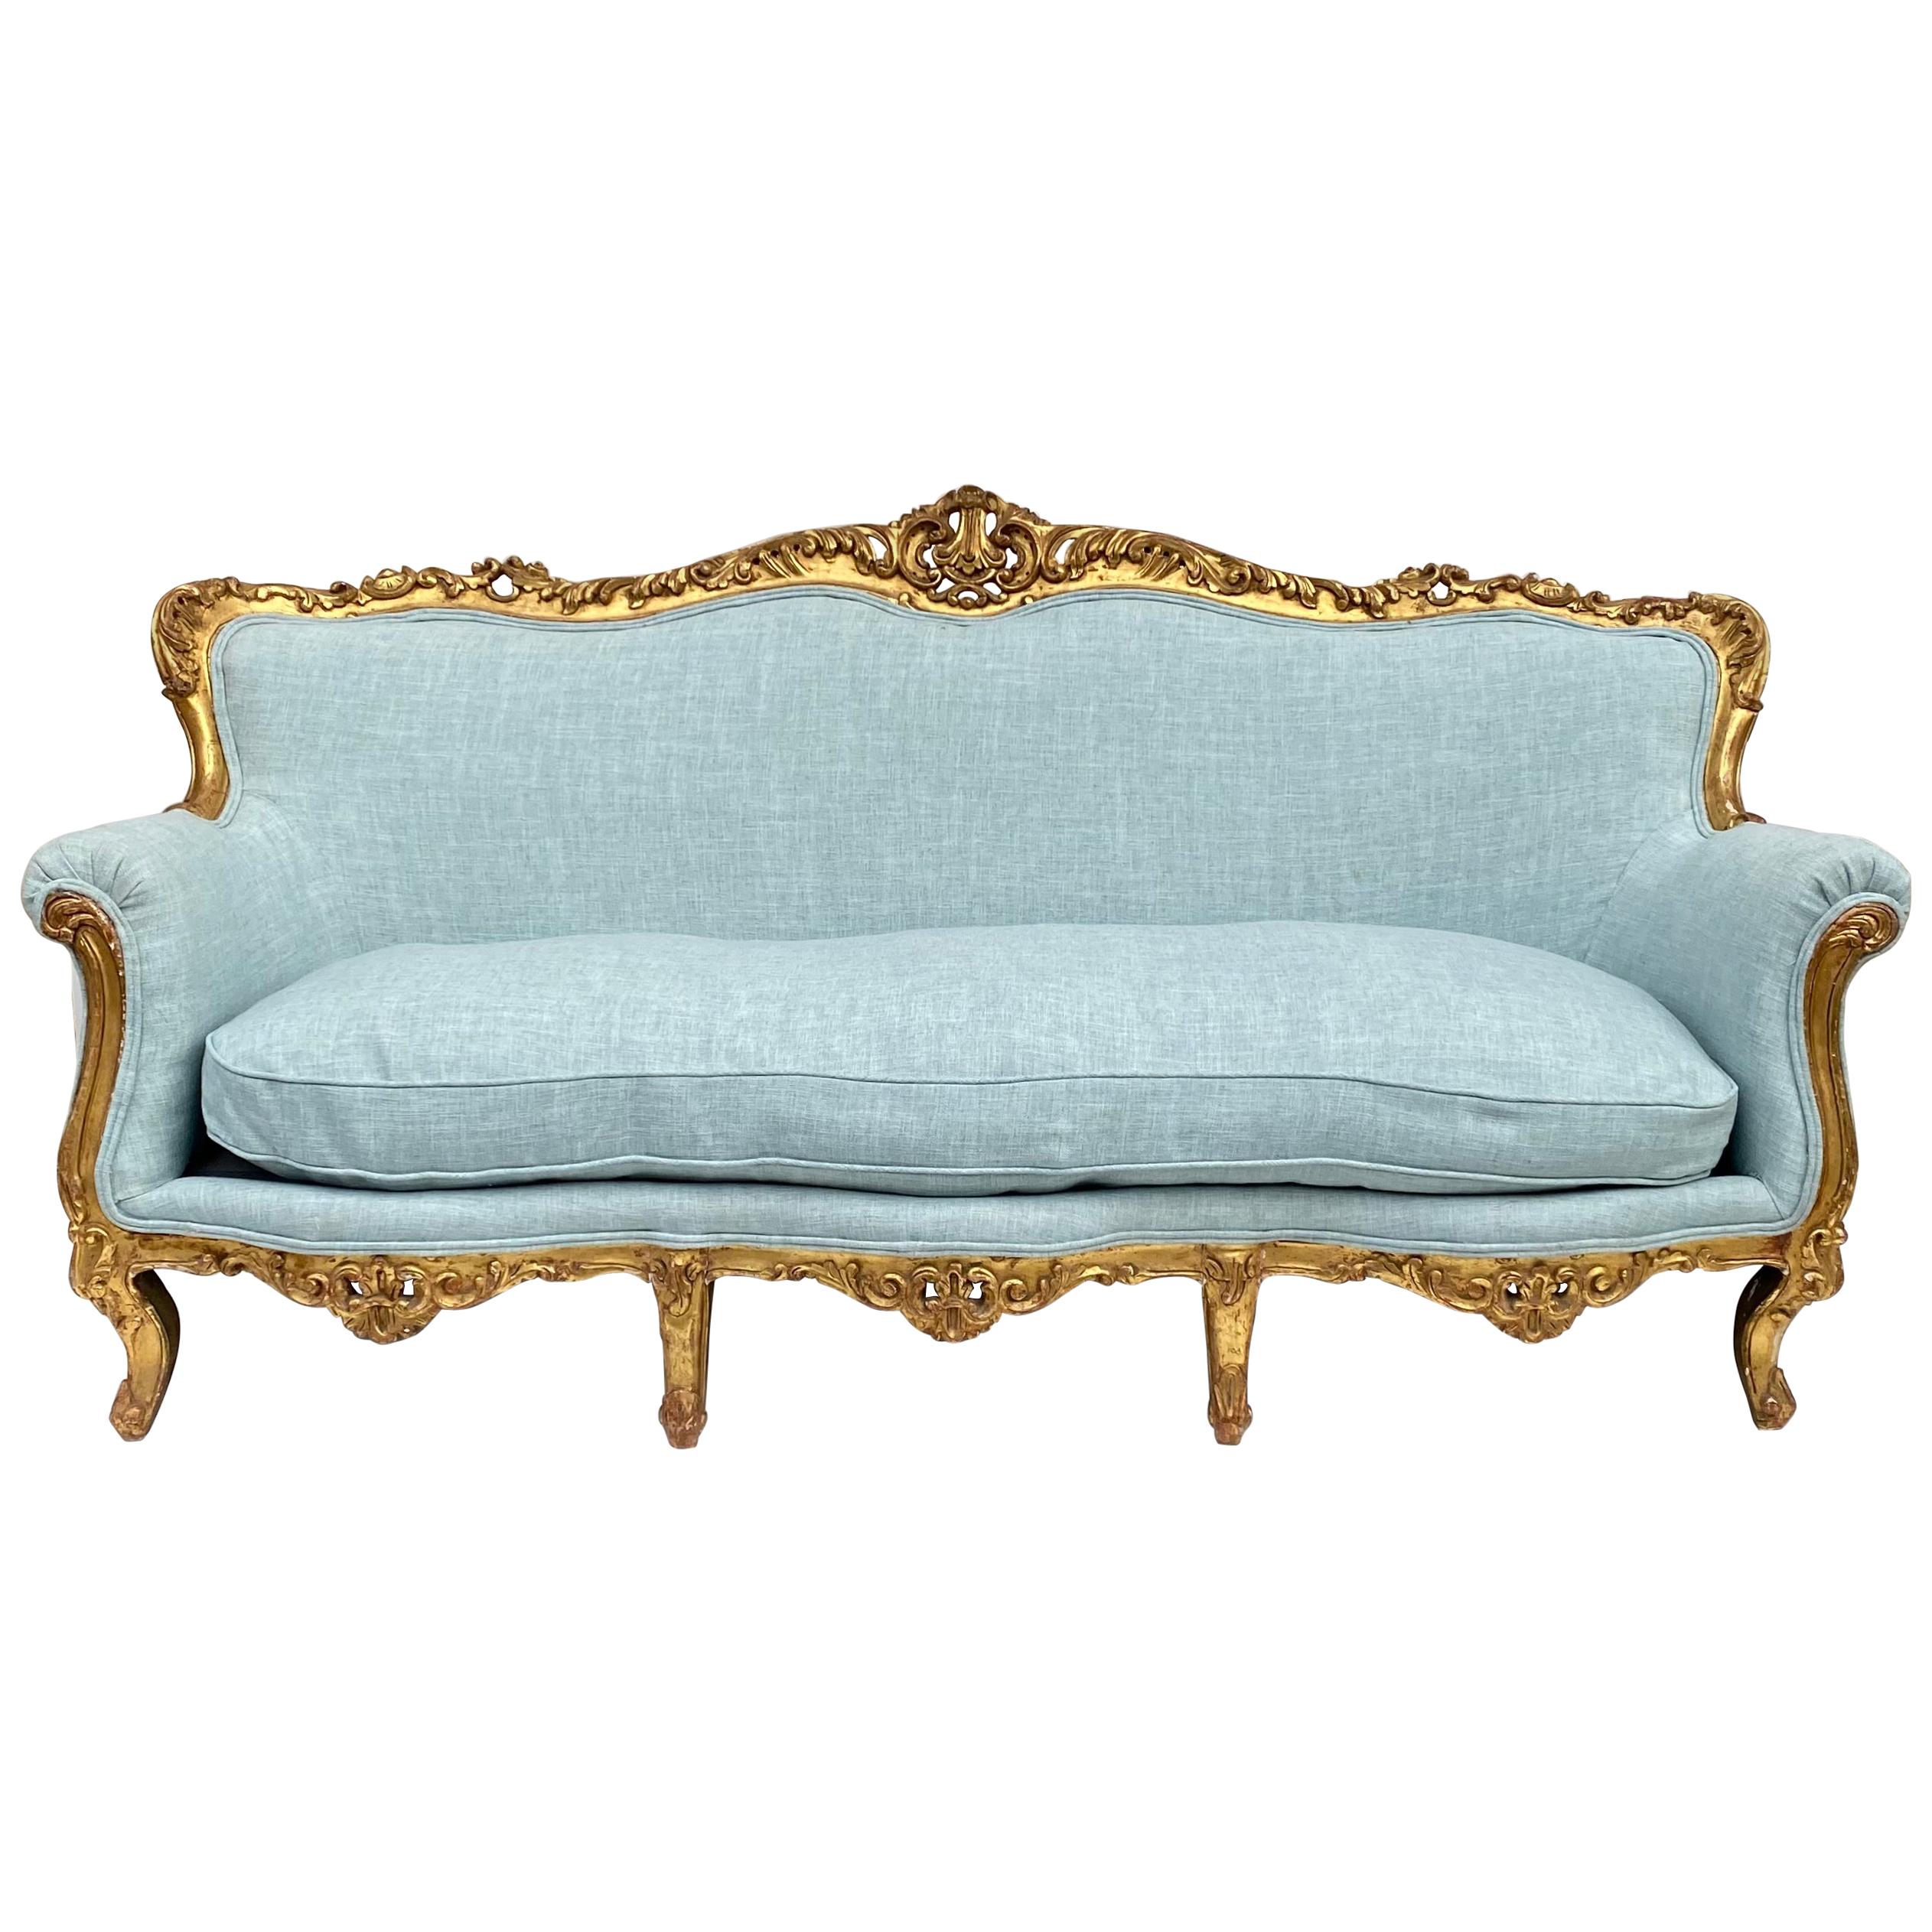 Antique French Sofa / Canape with Water Gilt Carved Frame